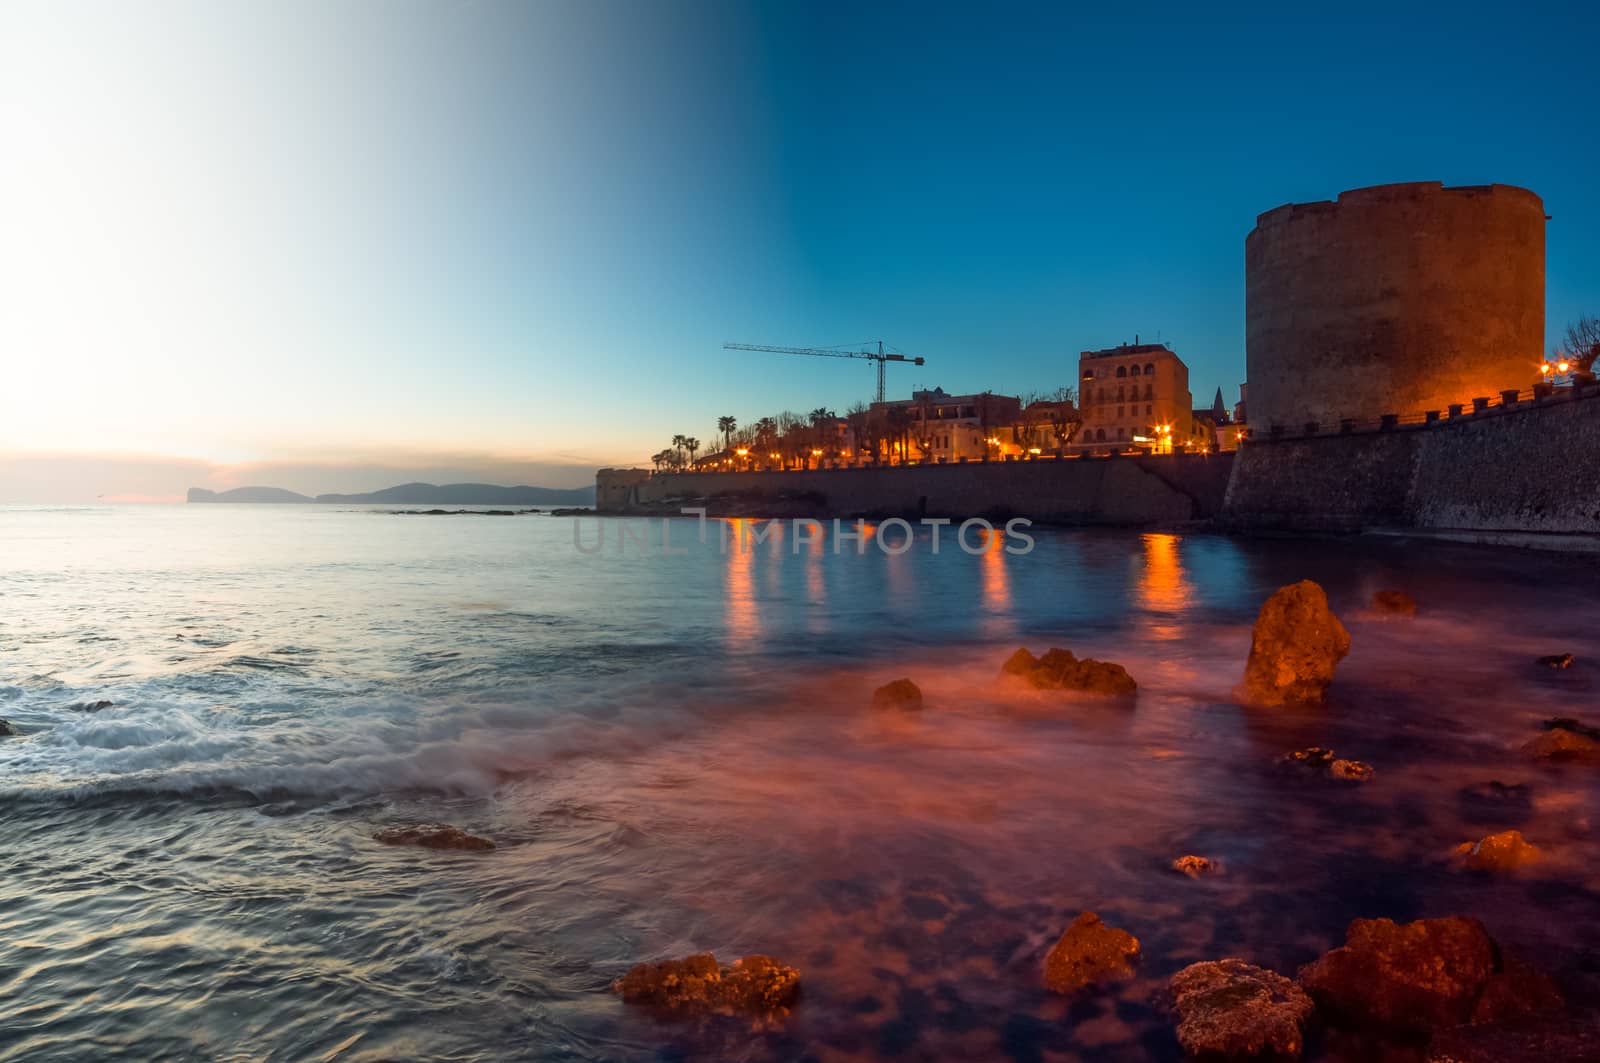 Beautiful landscape of the coast of sardinia, city of alghero, made with two exposures, the first one at sunset and the second one at night